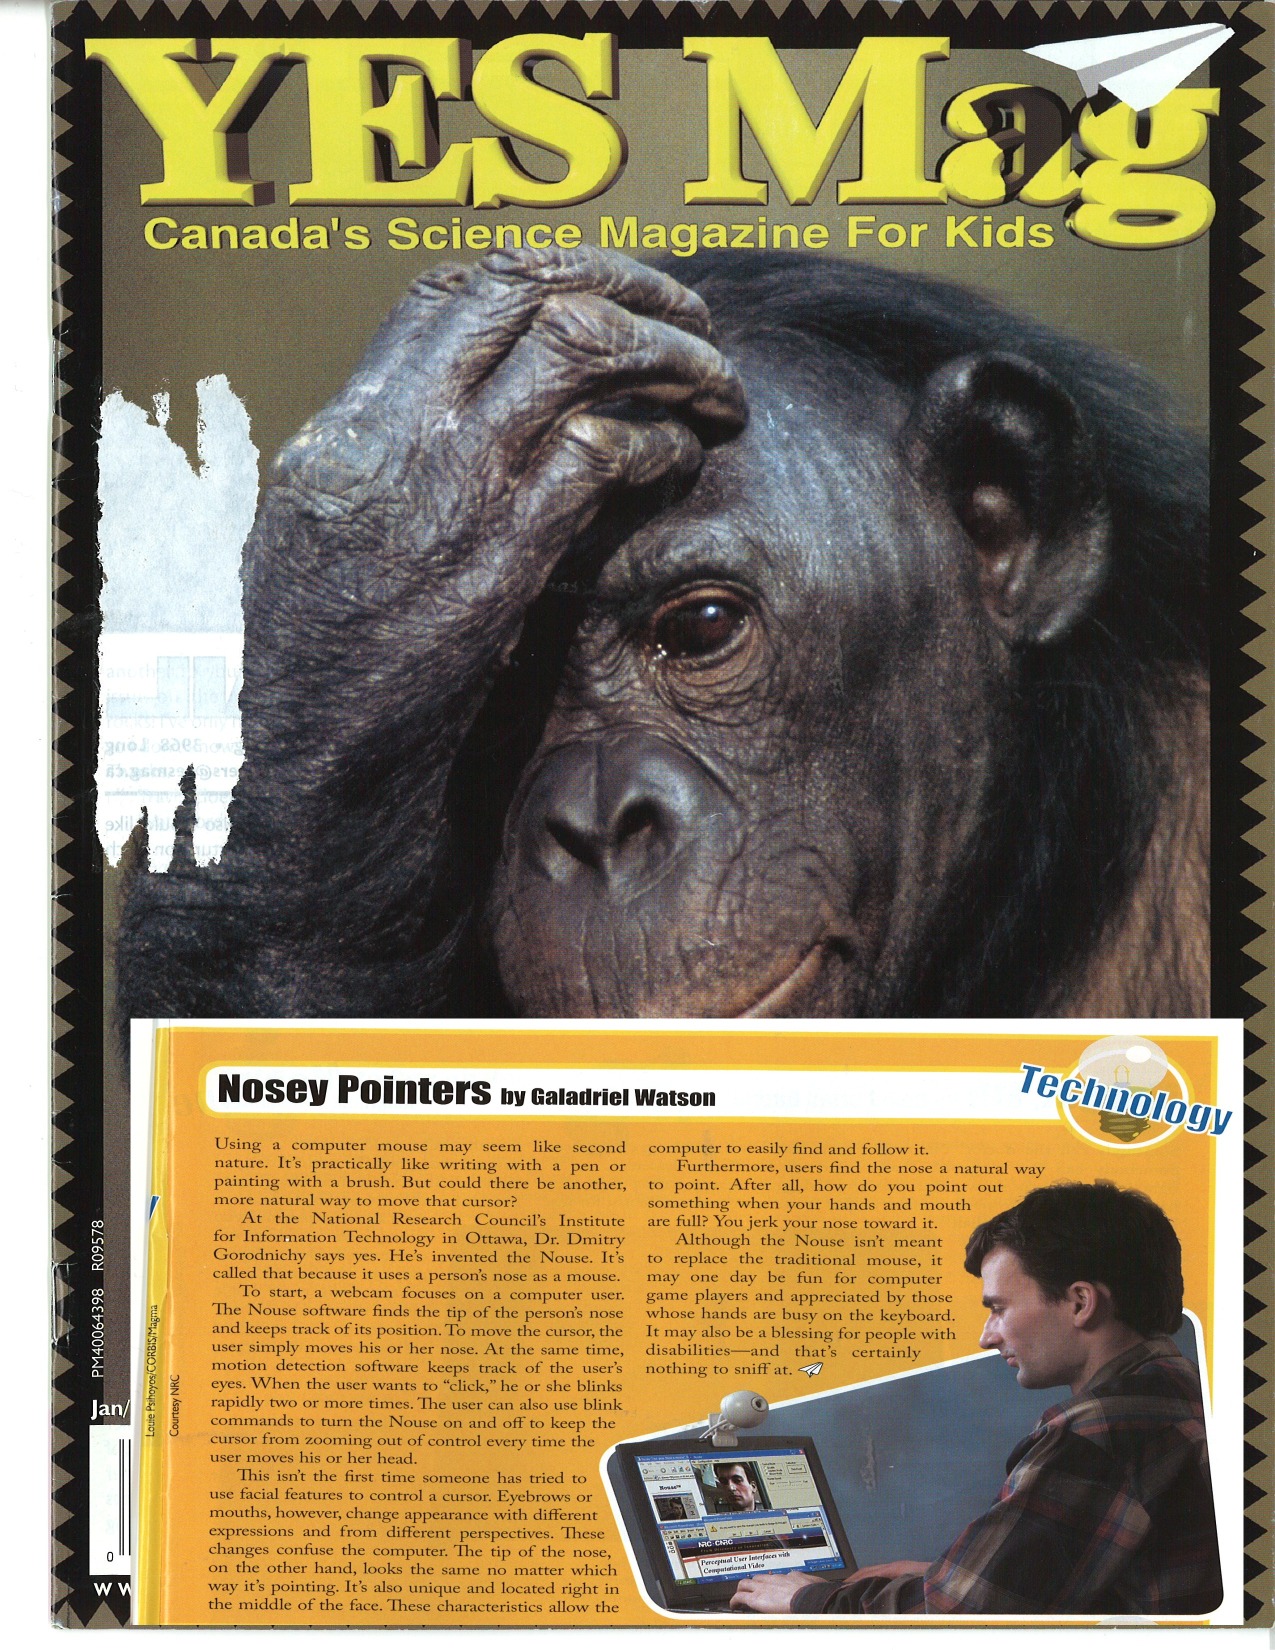 Cover page from Canada's Science Magazine For Kids featuring the work of Dmitry Gorodnichy